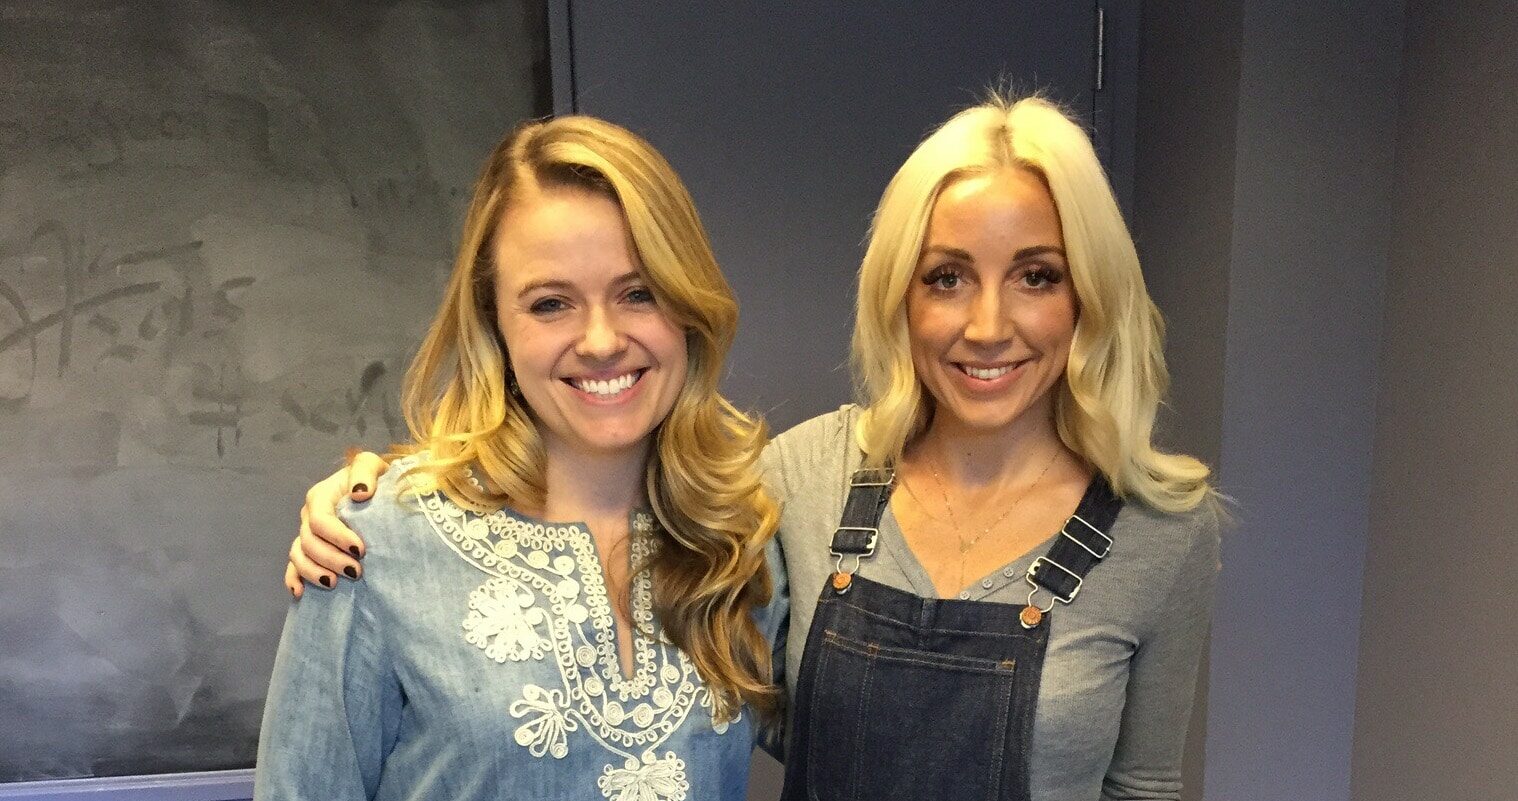 2014 Lyric Contest Winner Blair Bodine Discusses Her Co-Write with Ashley Monroe